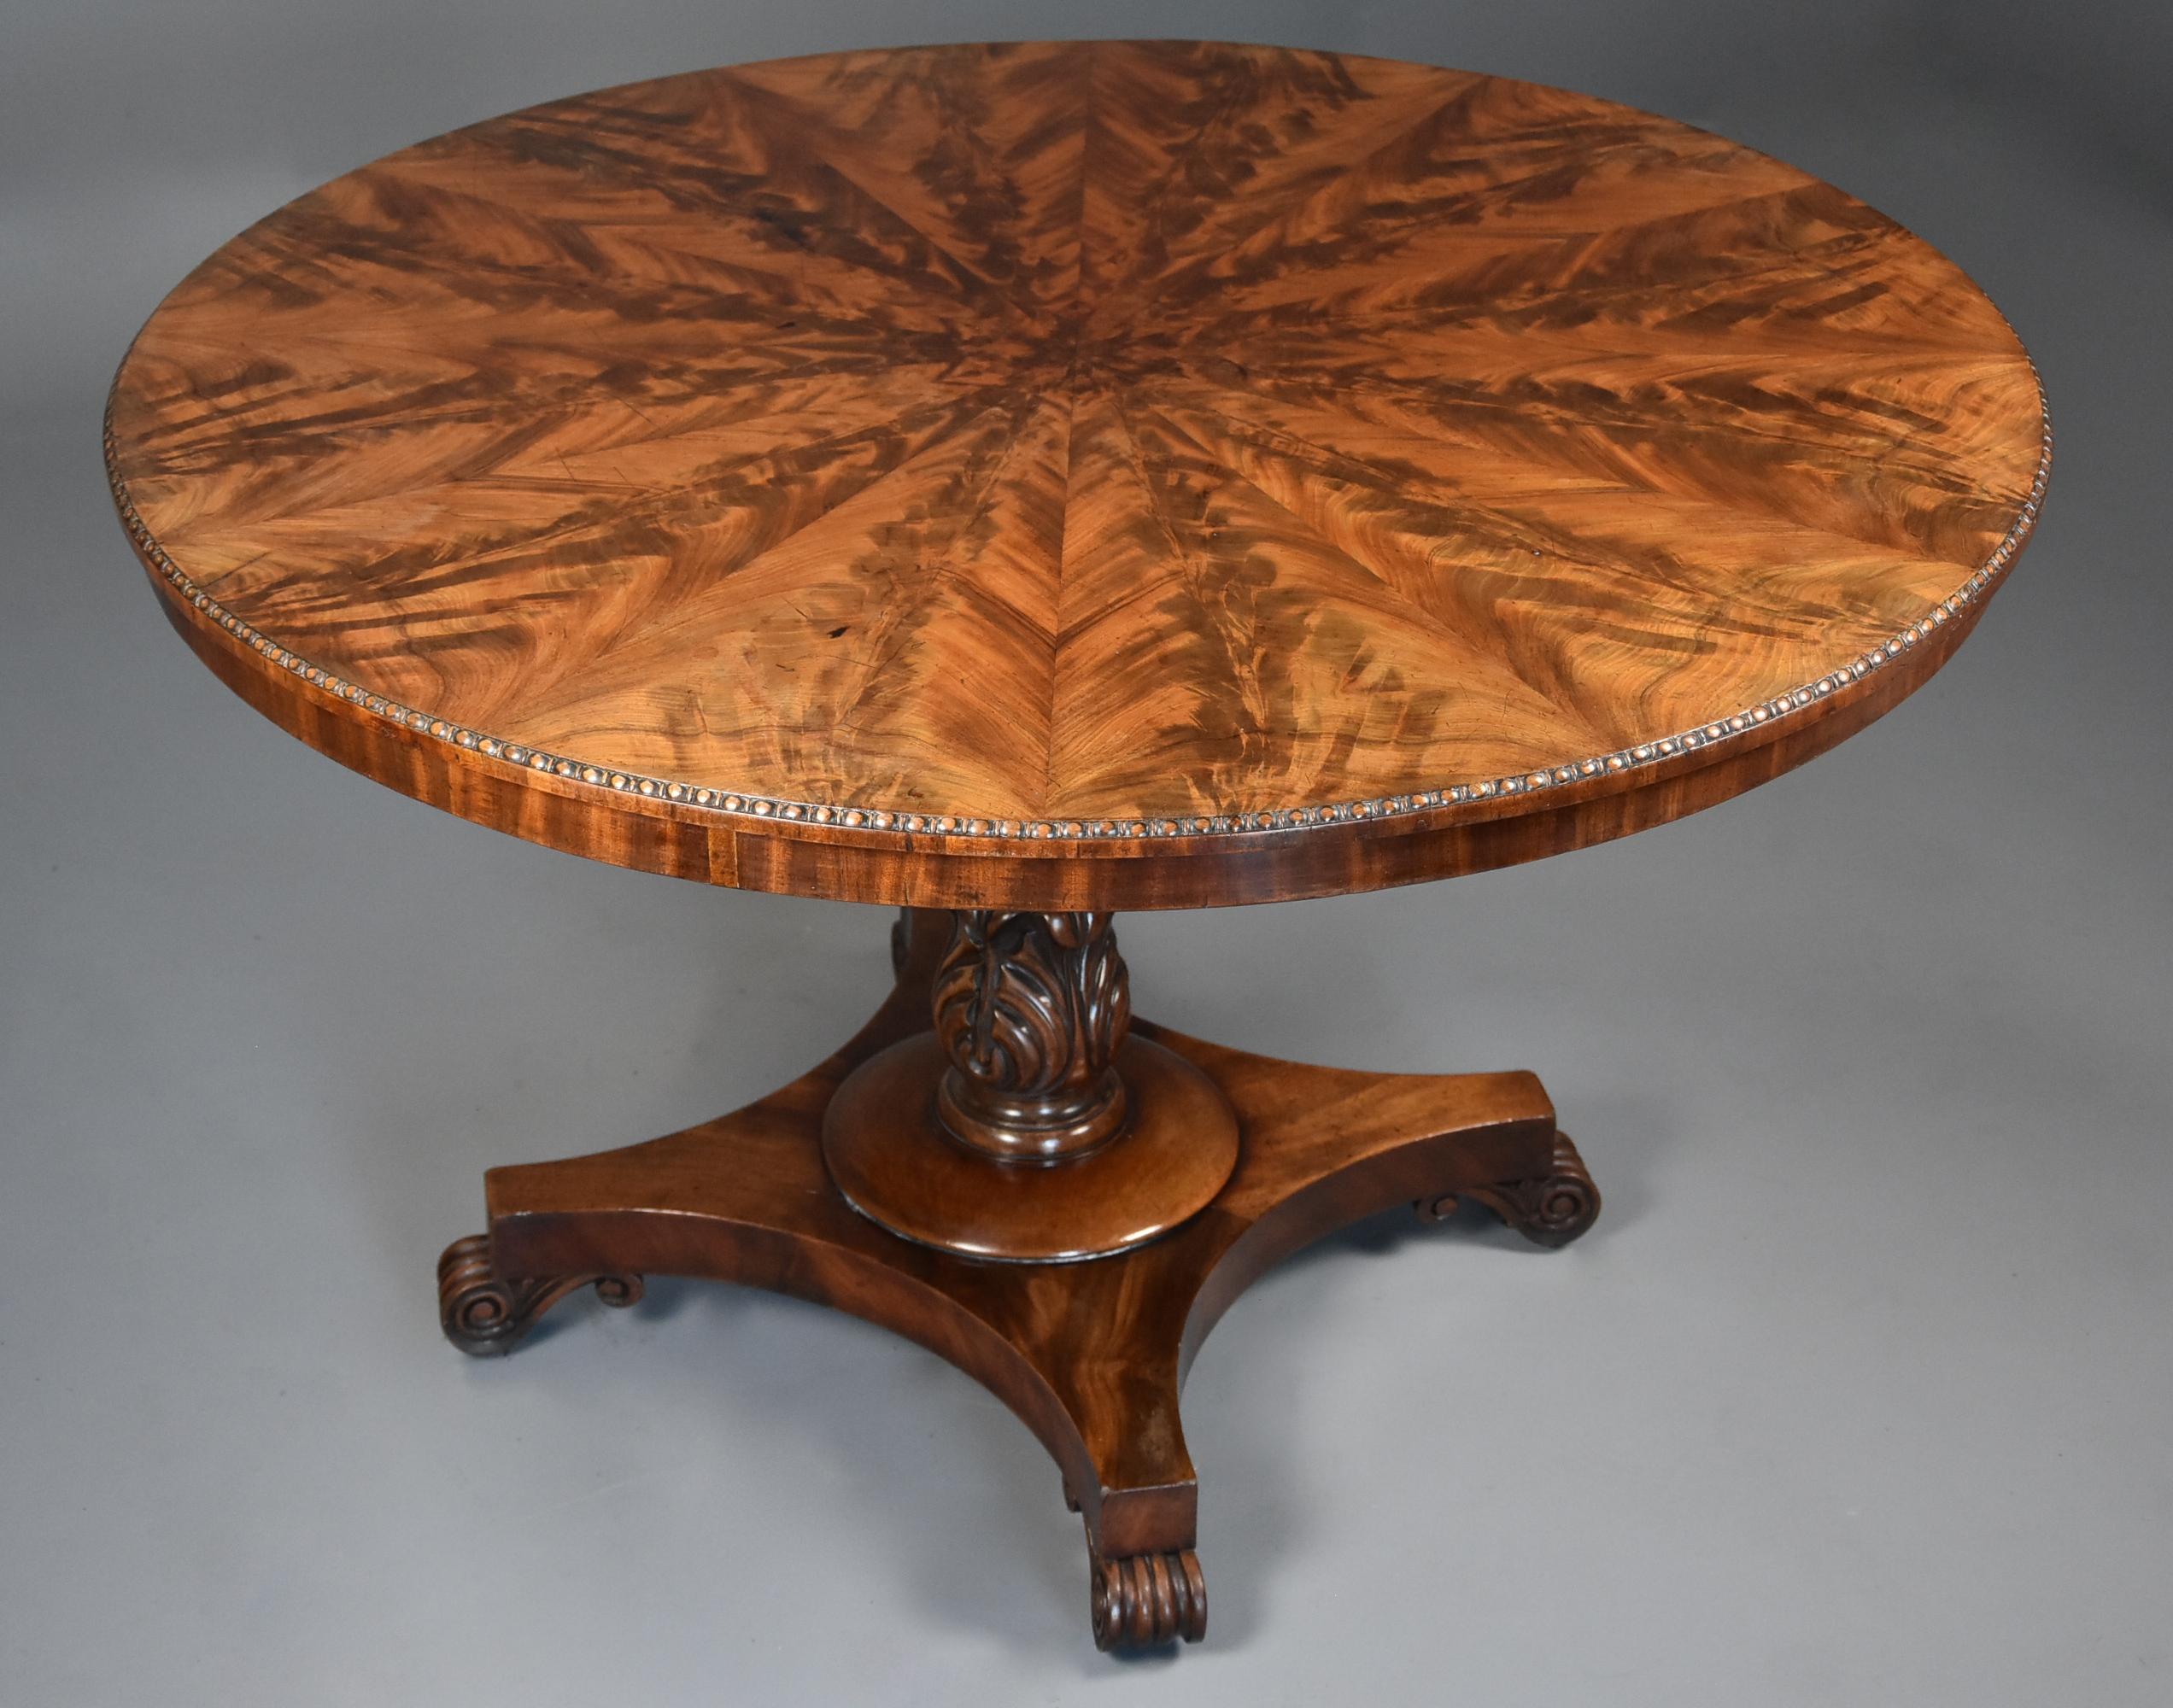 A superb quality William IVth (circa 1835) mahogany tilt-top breakfast table of fine patina (color).

This table consists of a superbly figured curl mahogany segmented circular top of fine patina (color) with ball bead decoration to the edge with